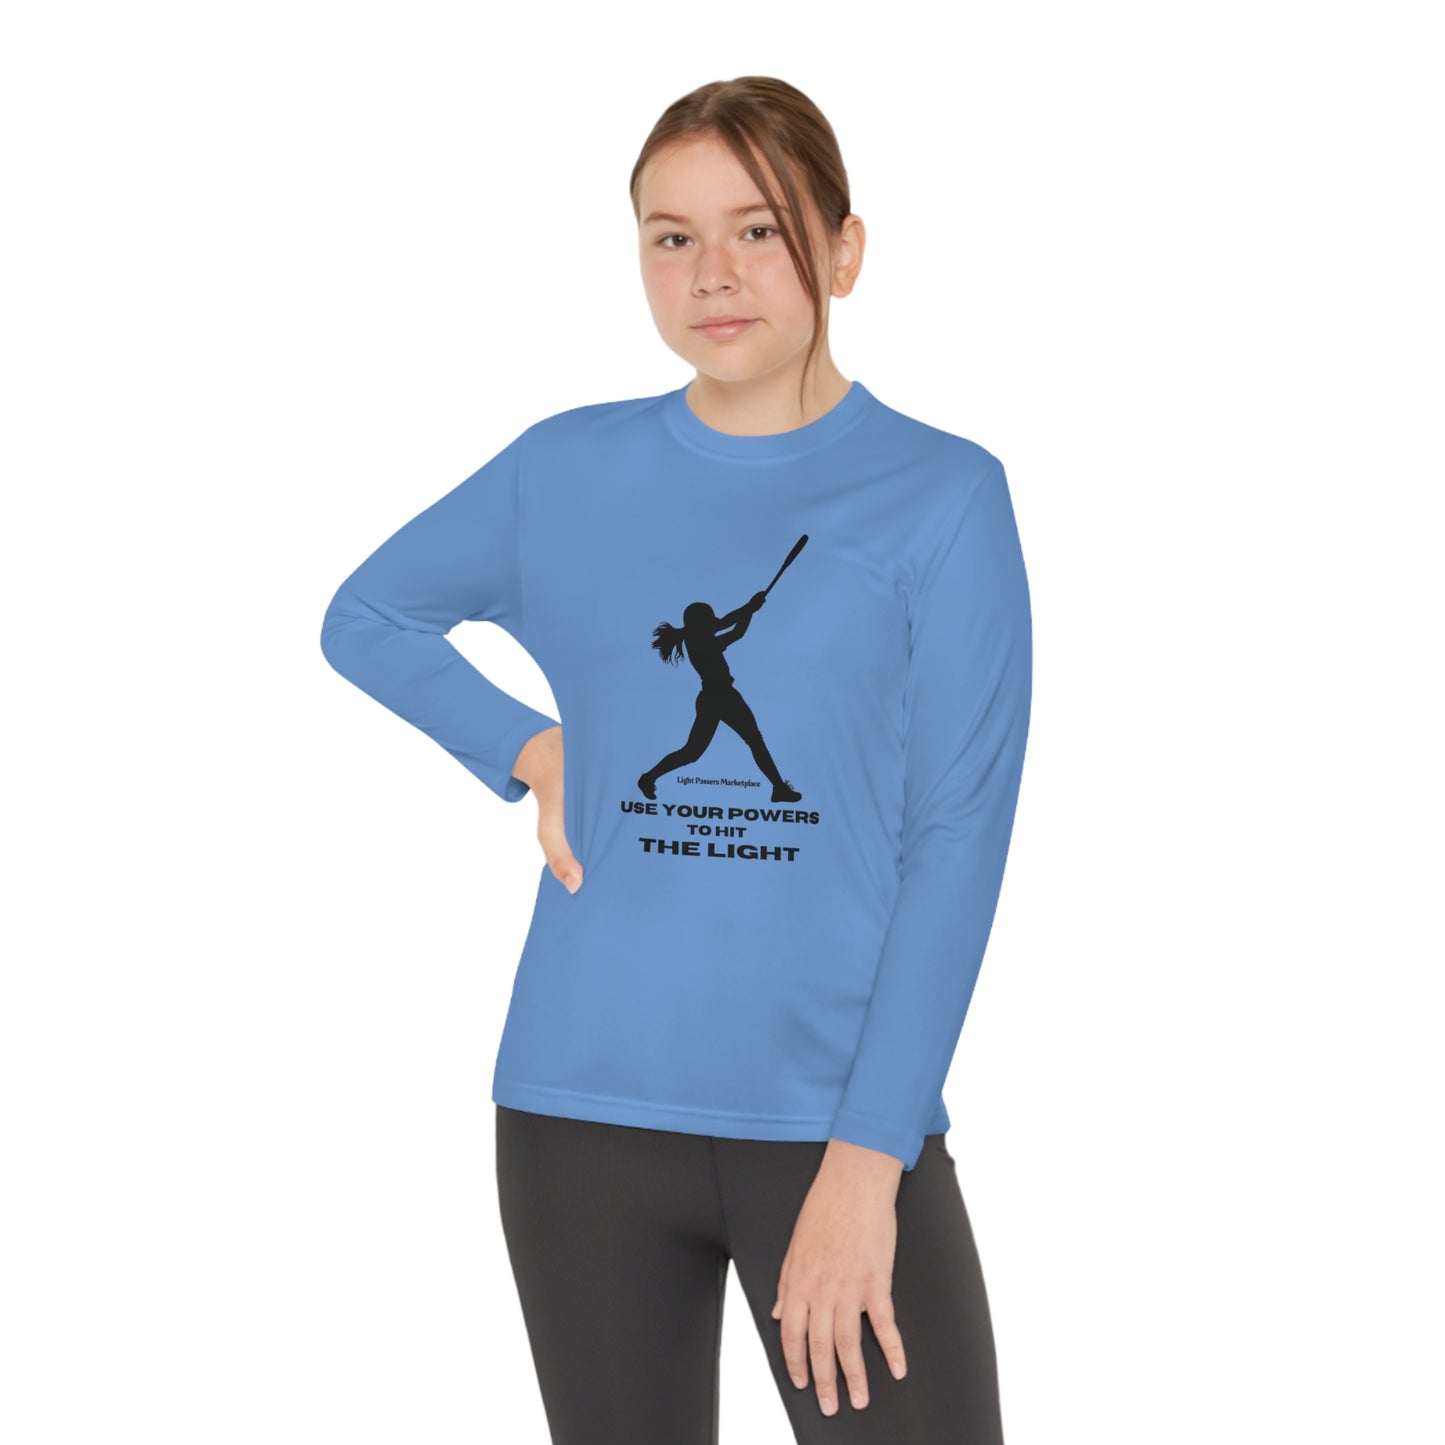 A girl in a blue long-sleeved tee, posing and swinging a bat, embodies active comfort. Made of 100% moisture-wicking polyester, lightweight and breathable for active kids.